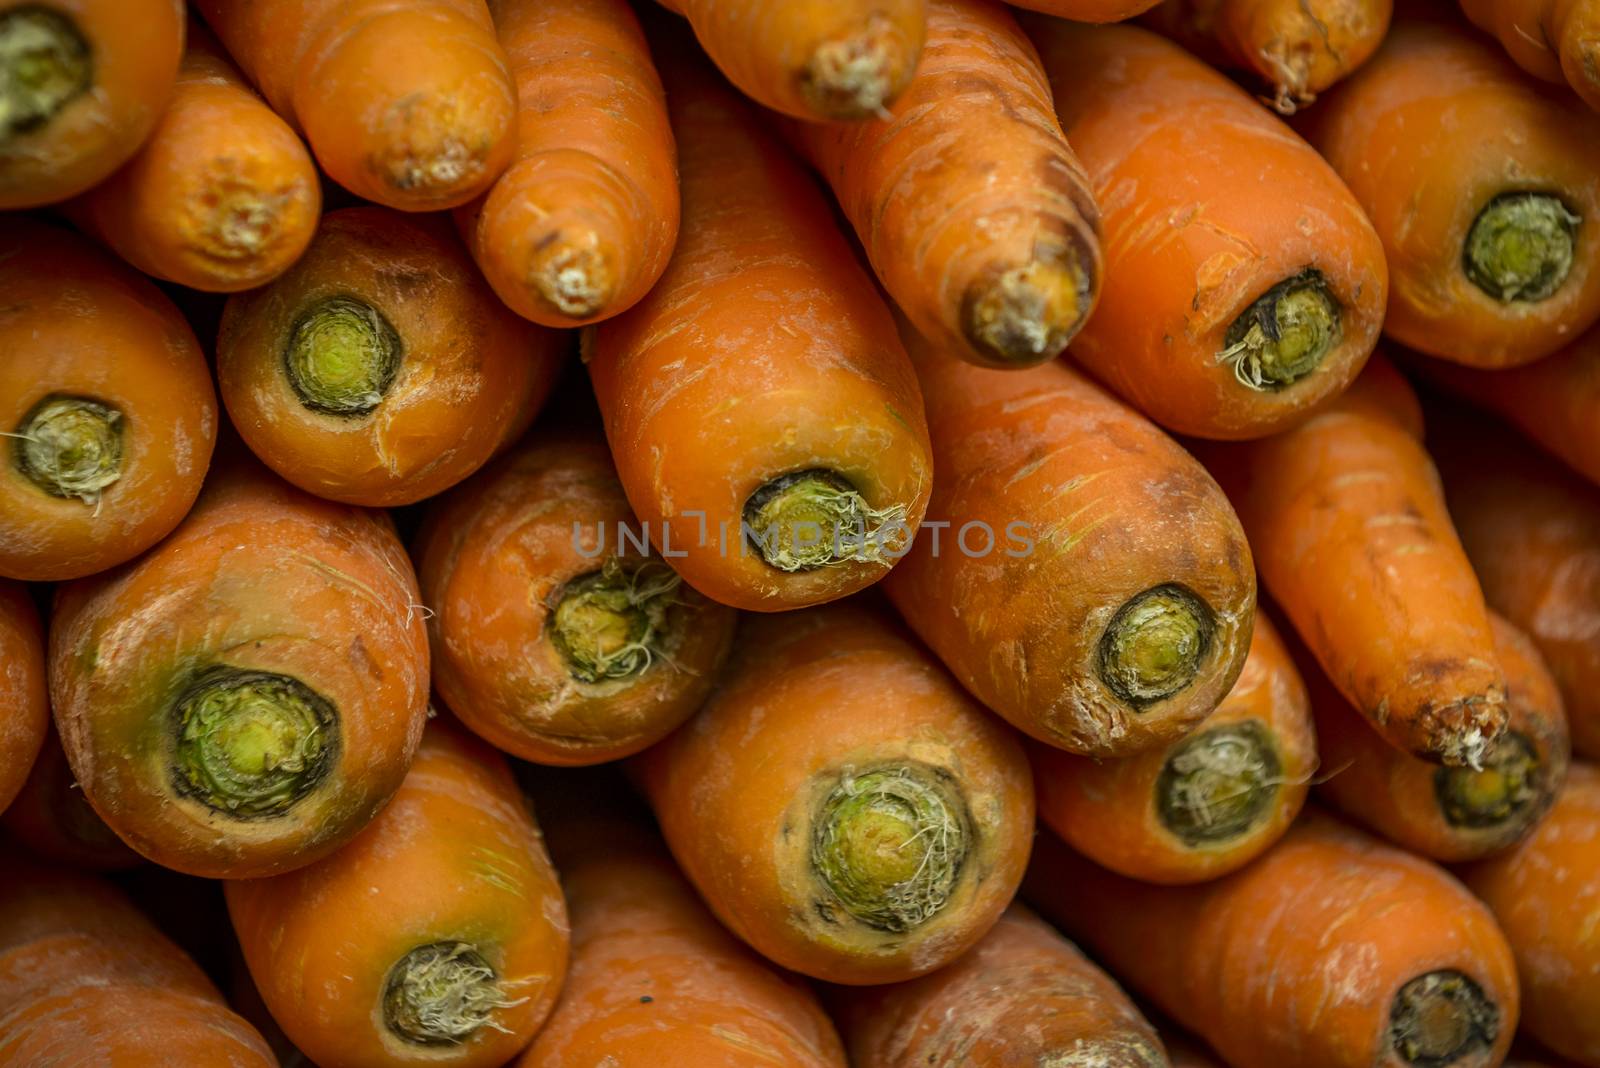 close up from a pile of orange carrots